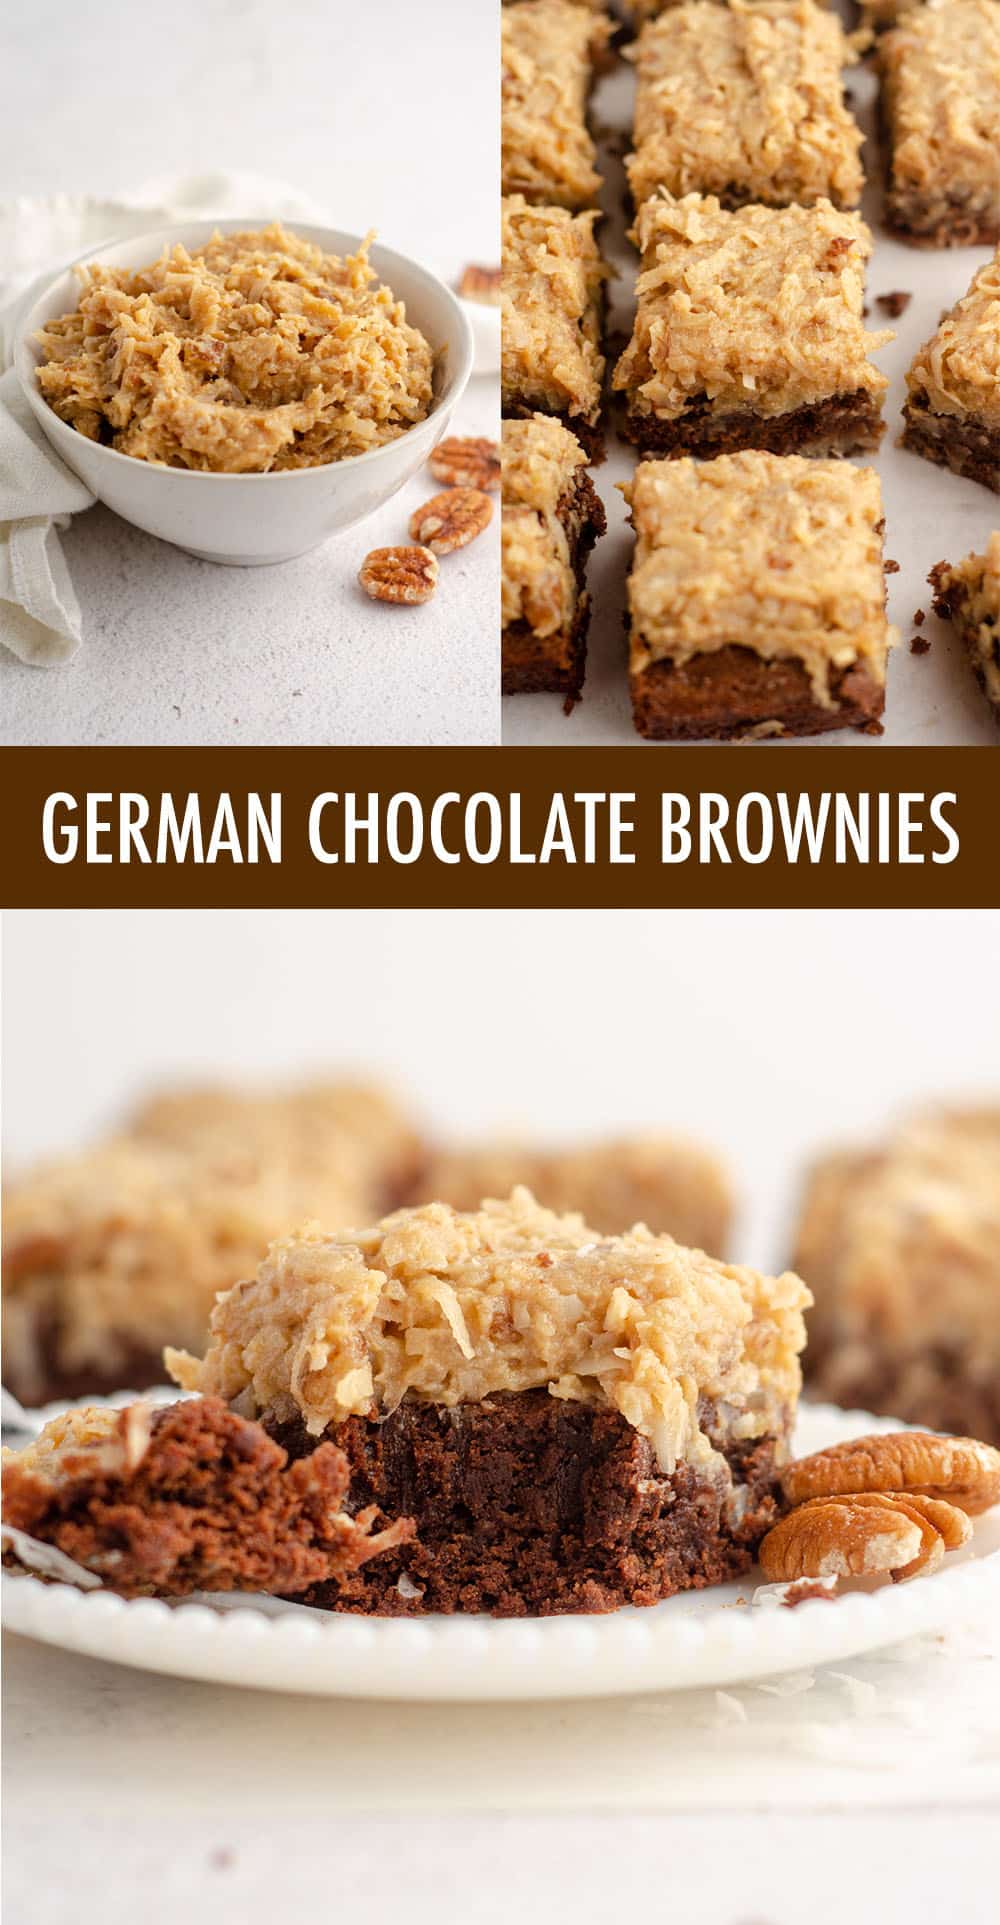 My classic go-to scratch brownie base gets topped with an ultra creamy coconut pecan frosting to turn them into indulgent German chocolate brownies. via @frshaprilflours